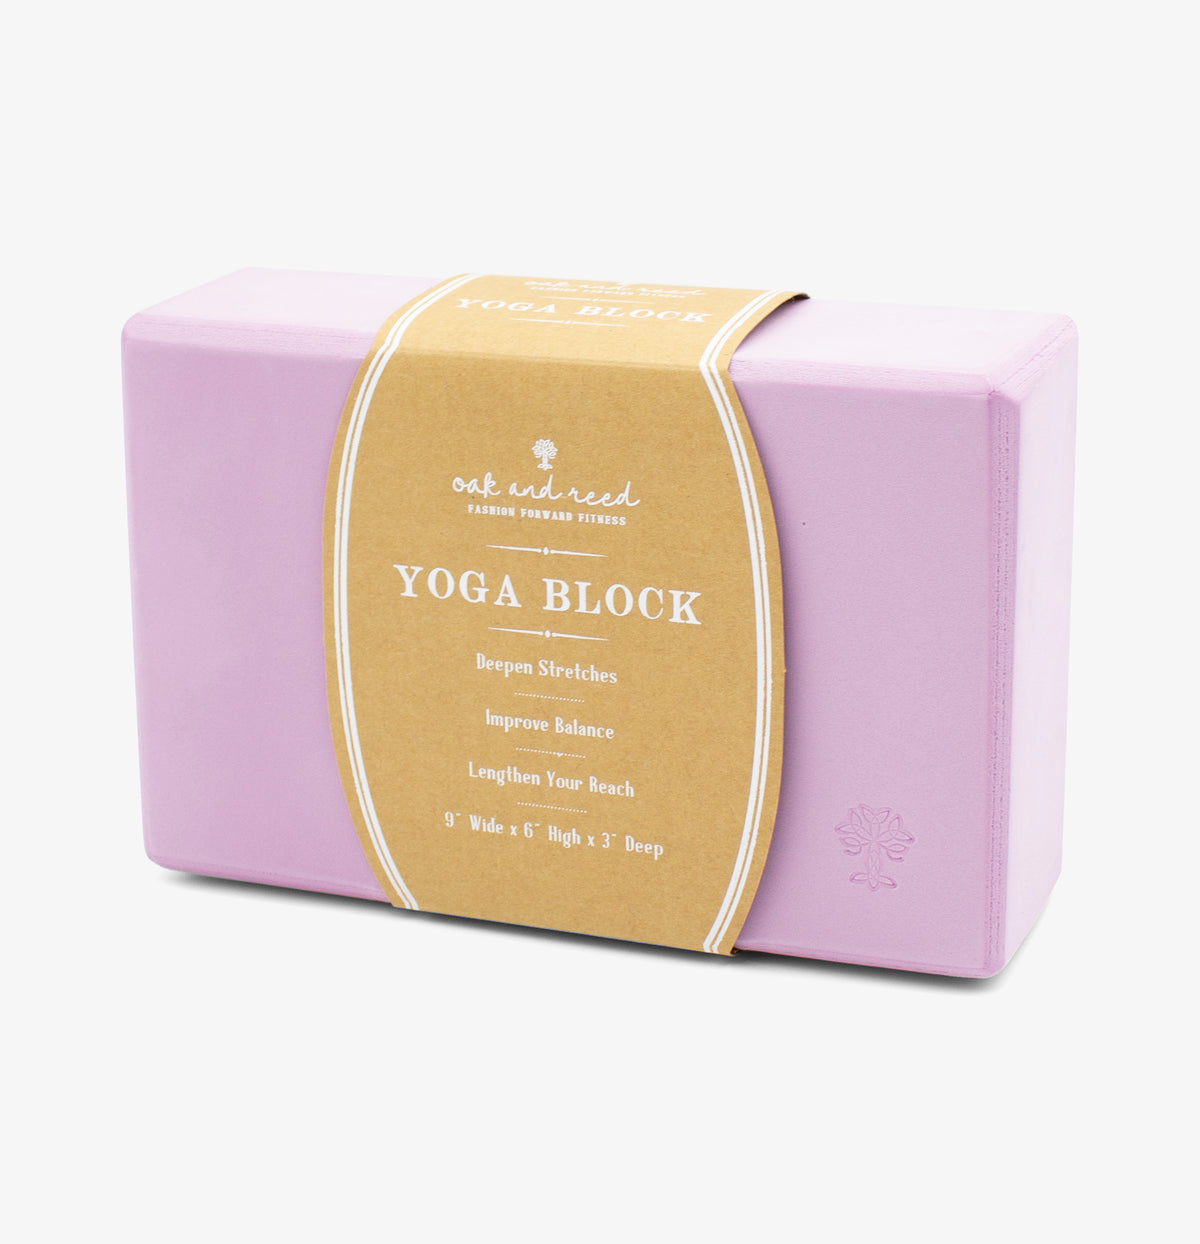 Ladina Yoga - Finally got more on-brand packaging for the yoga